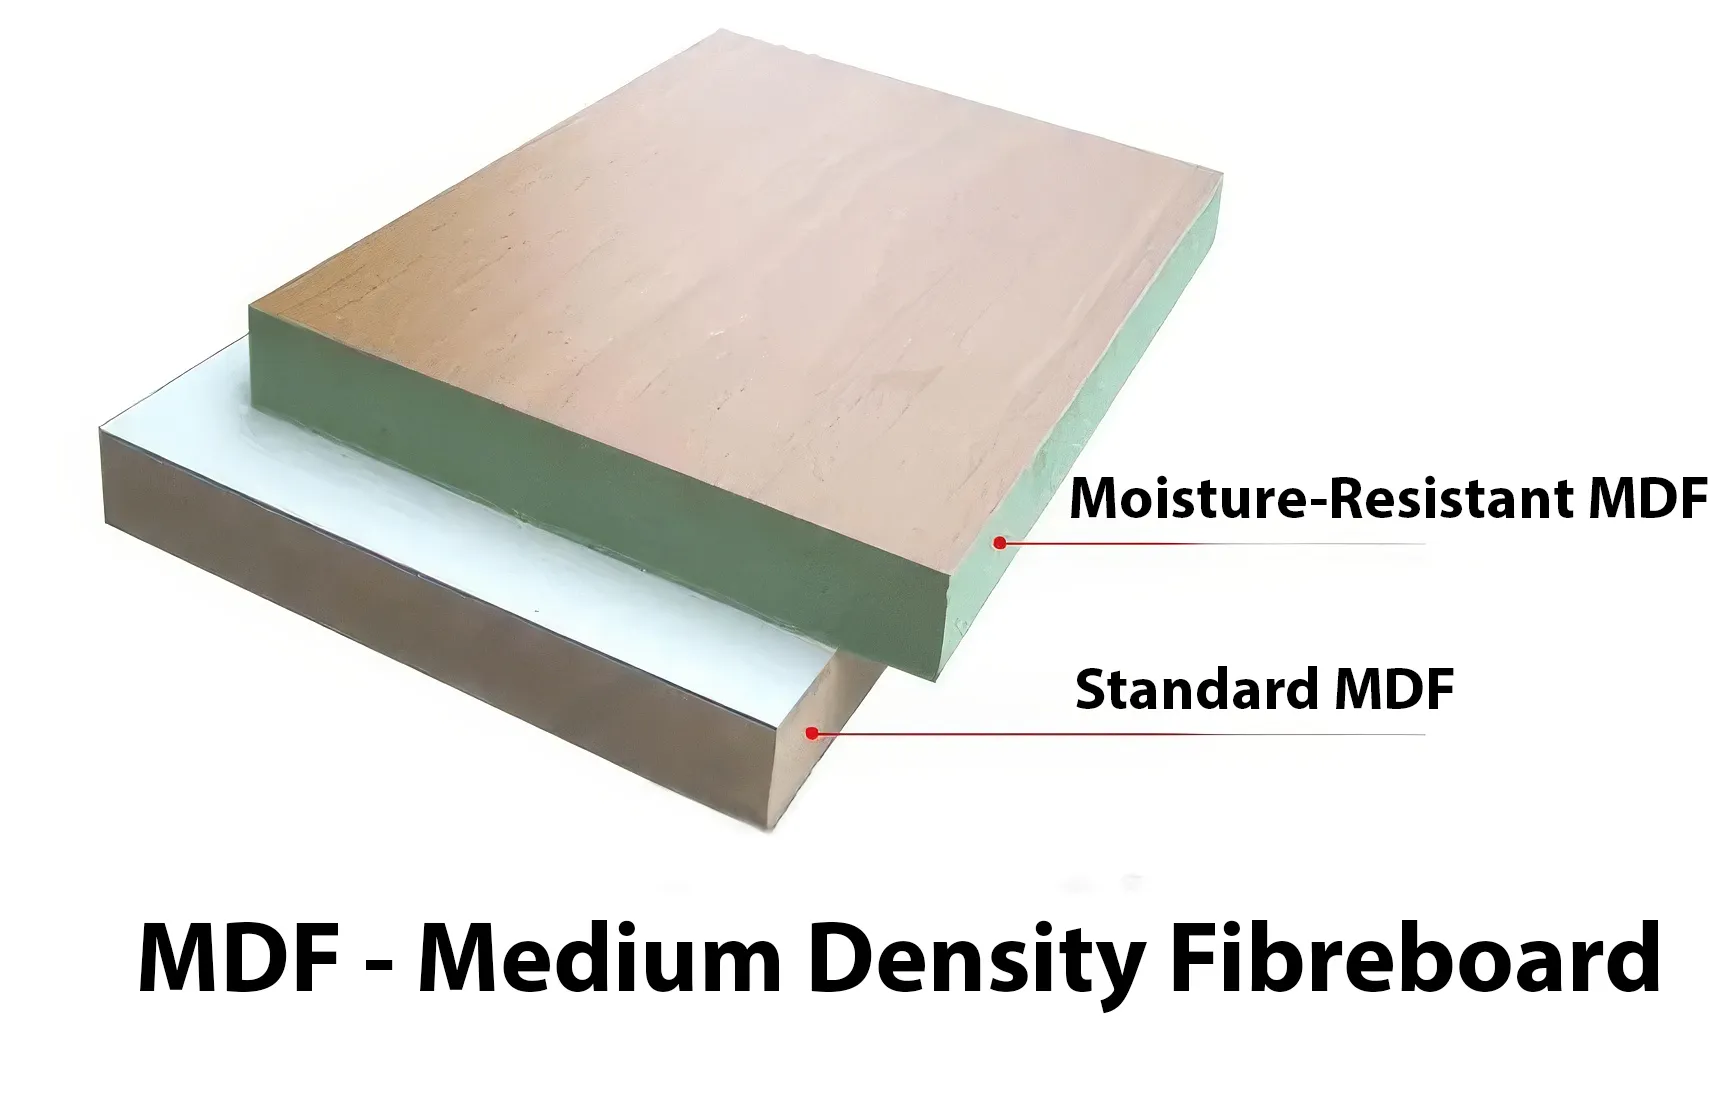 MDF and Moisture Resistant MDF